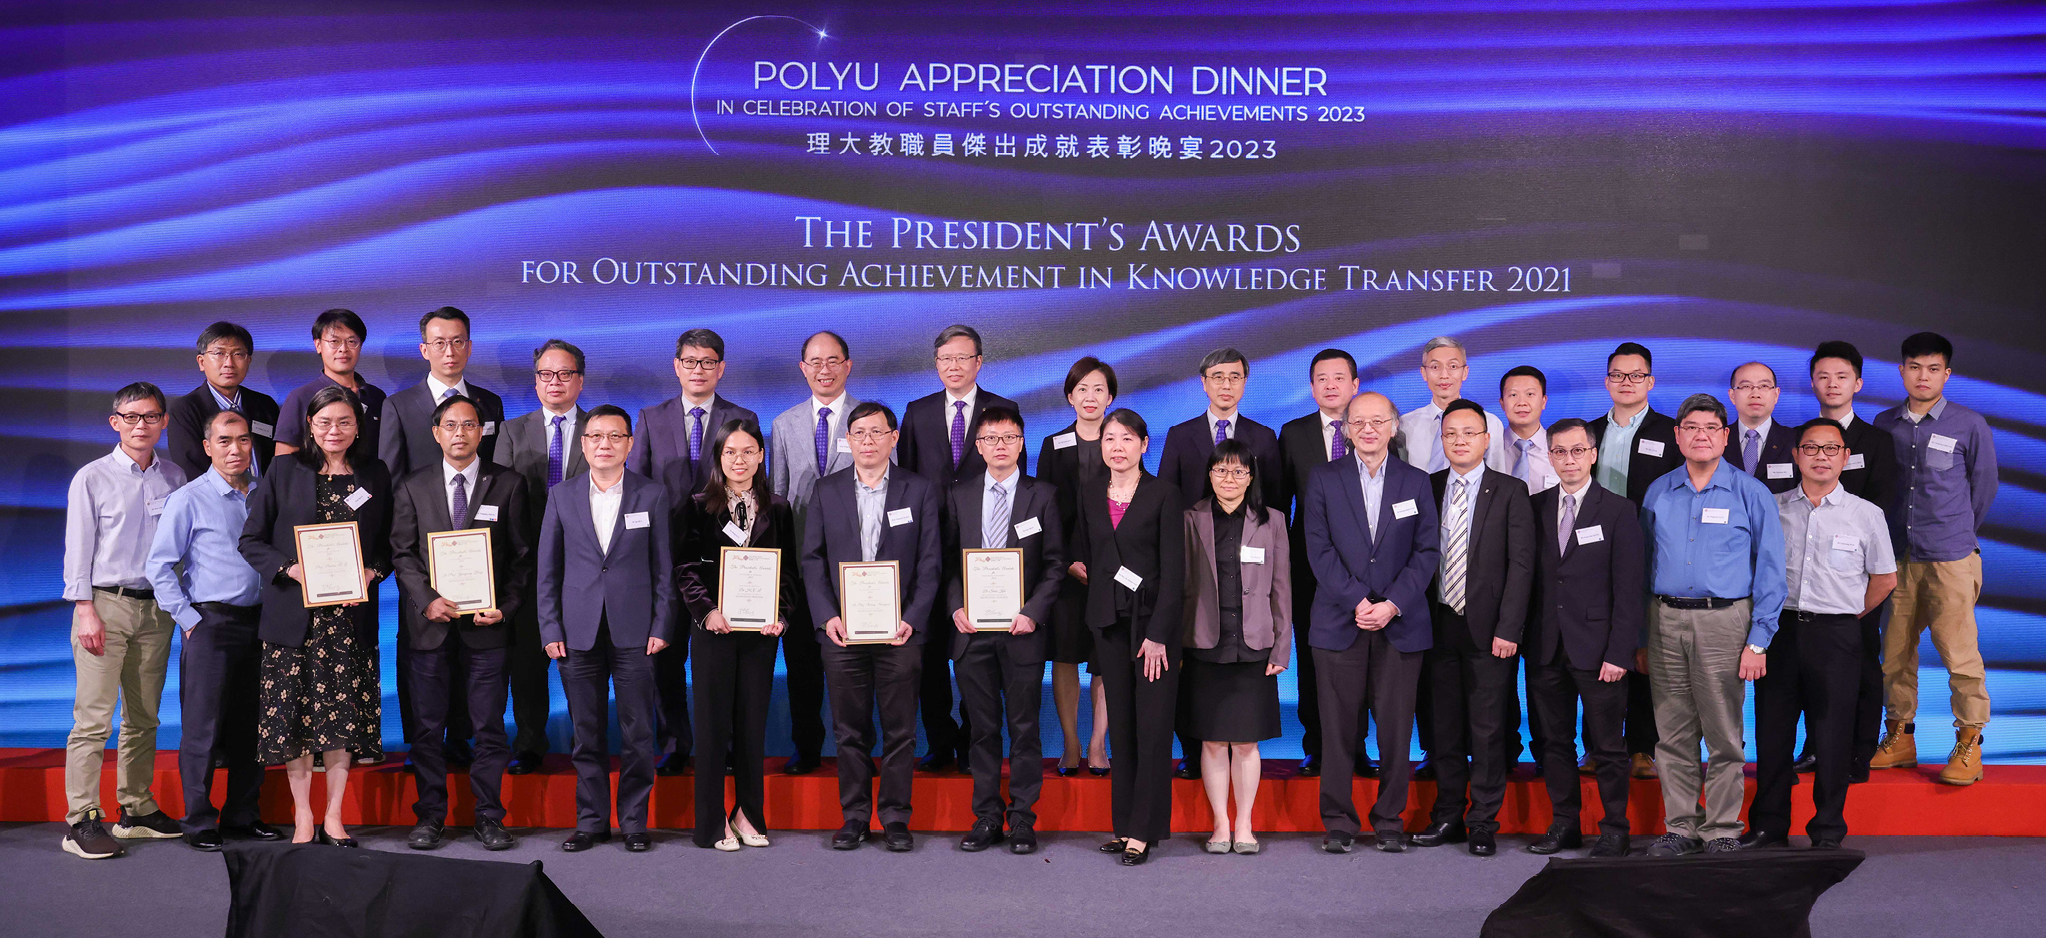 Awardees of The President’s Awards for Outstanding Achievement in Knowledge Transfer 2021